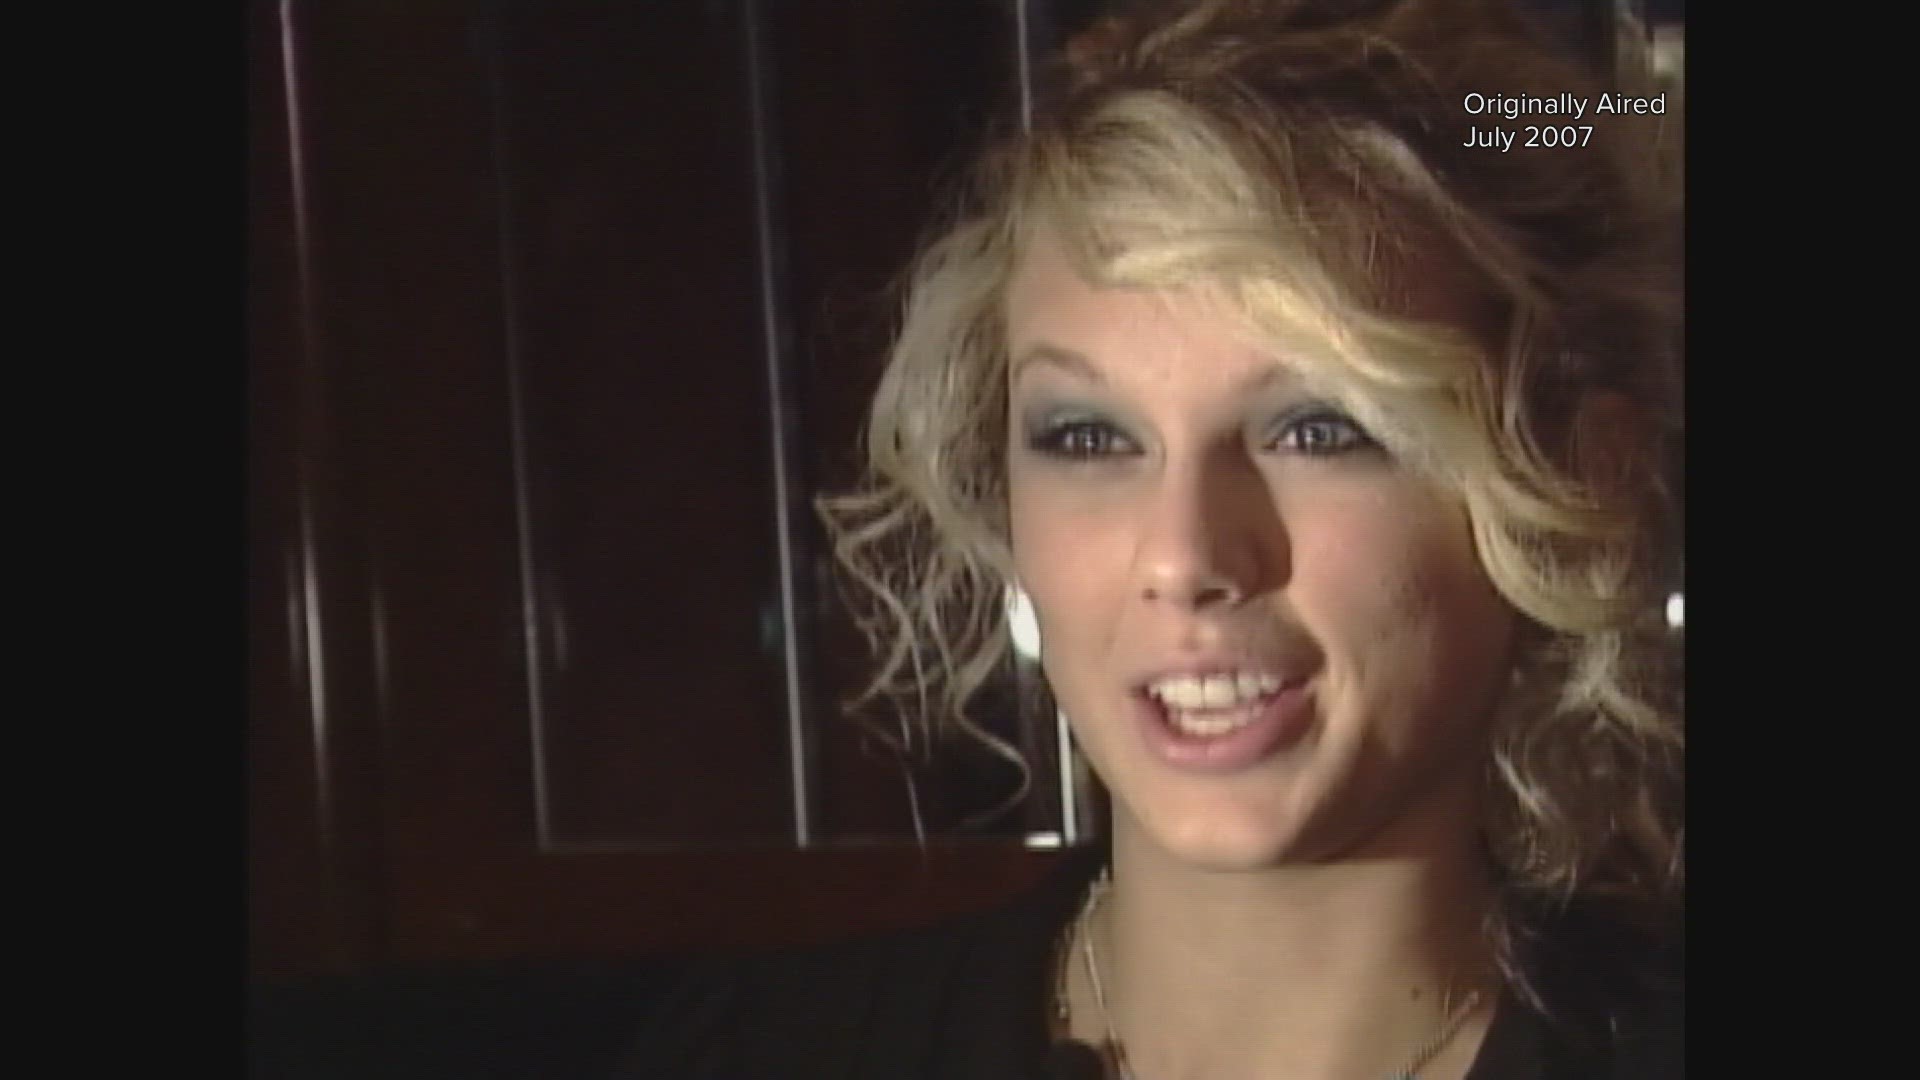 Kathleen Shannon sat down with Taylor Swift in 2007 while she was in Portland touring with Brad Paisley.